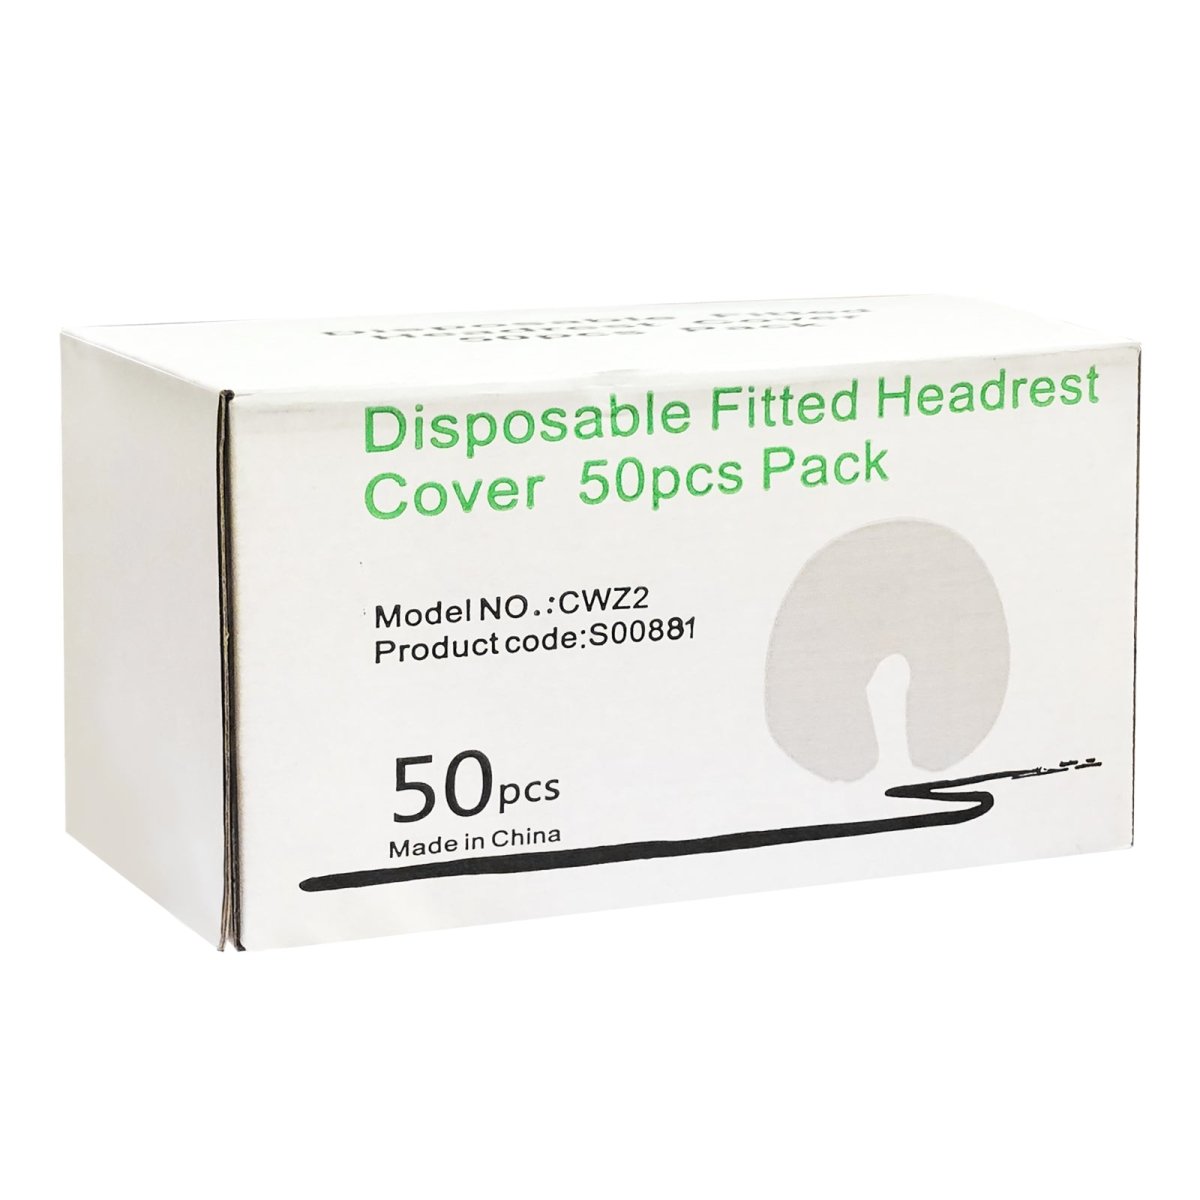 Disposable Face Cradle Cover - Fitted 50 pcs/Box - Greenlife Treatment-Disposable Headrest Cover